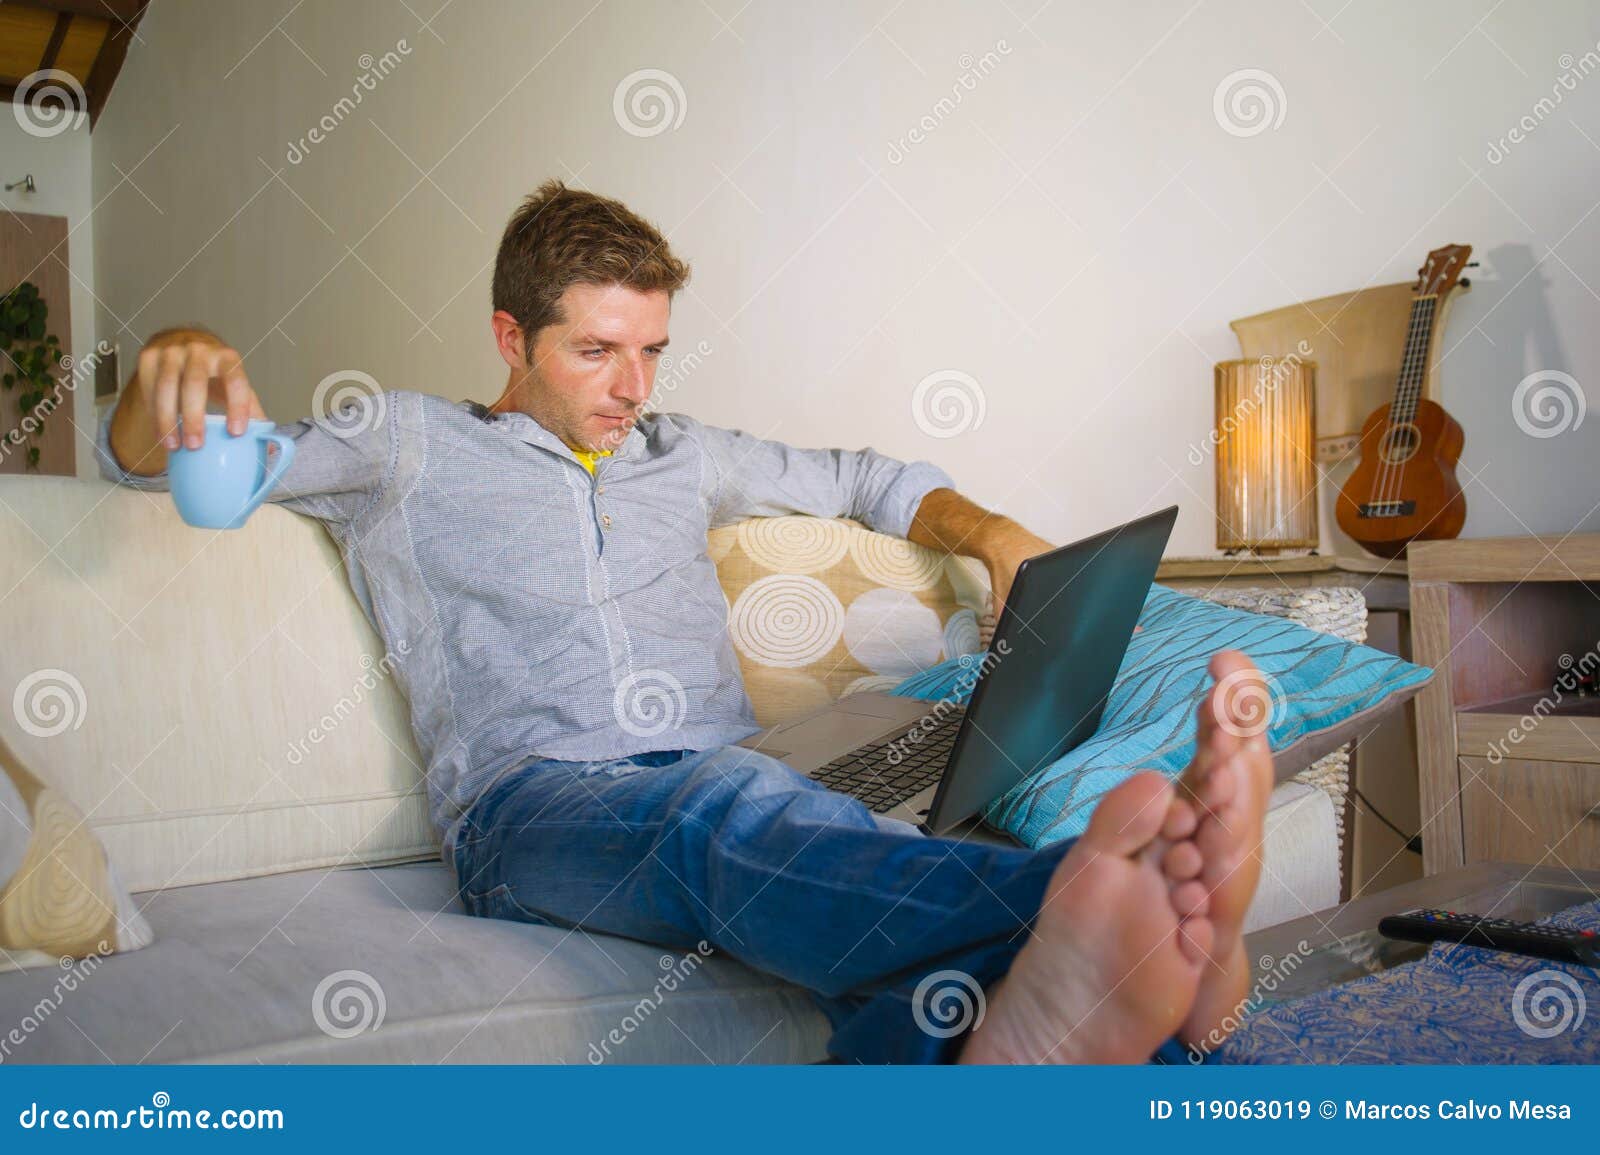 Young Attractive and Successful Man Working from Home Living Room ...